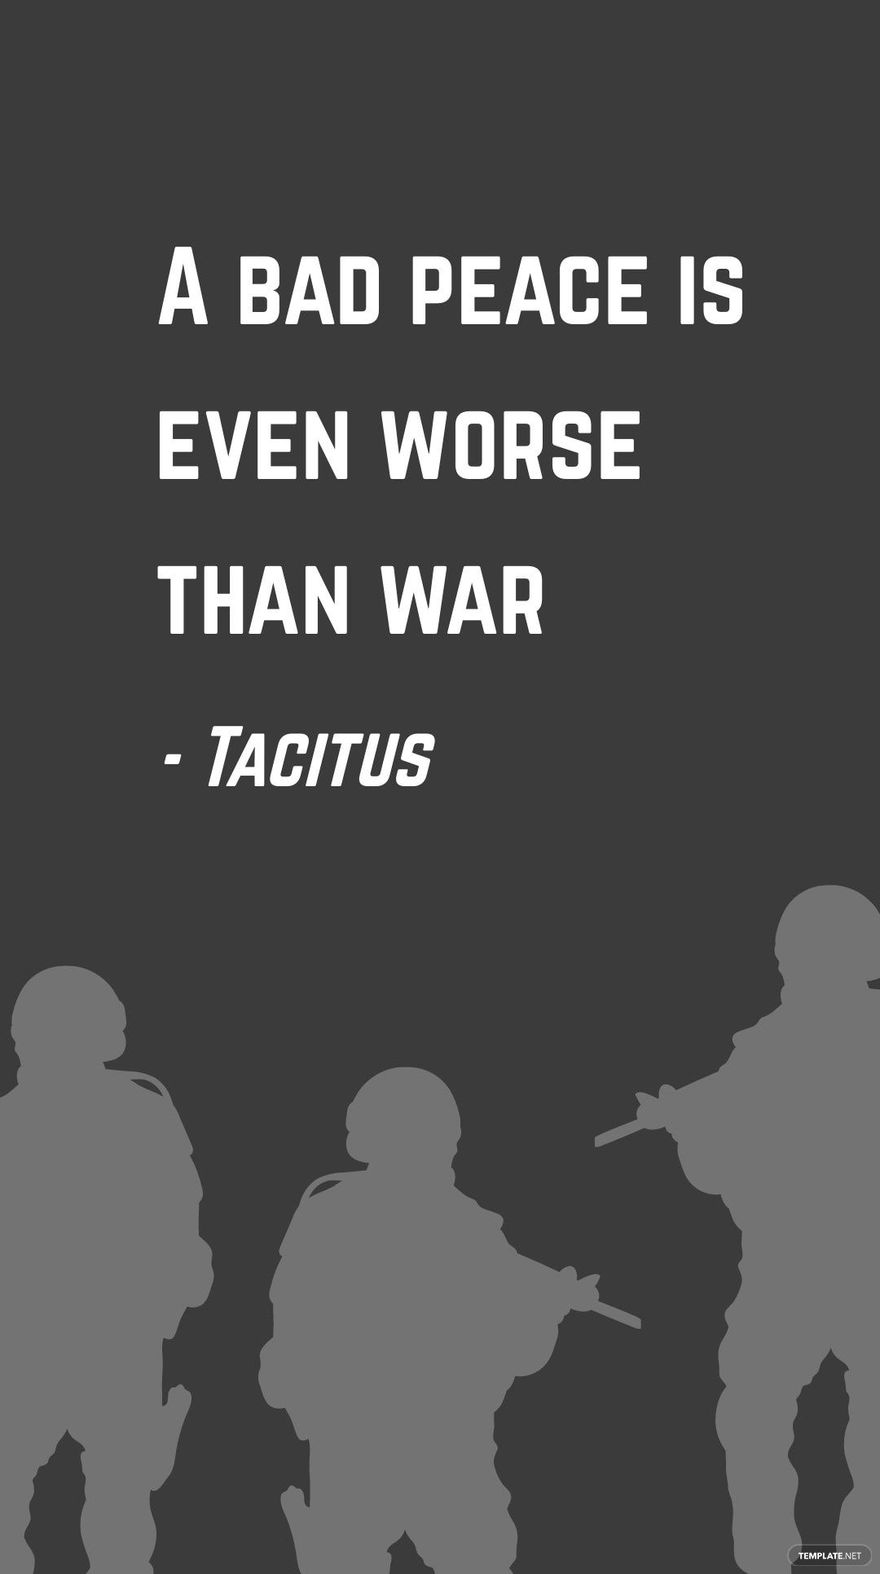 Free Tacitus - A bad peace is even worse than war in JPG